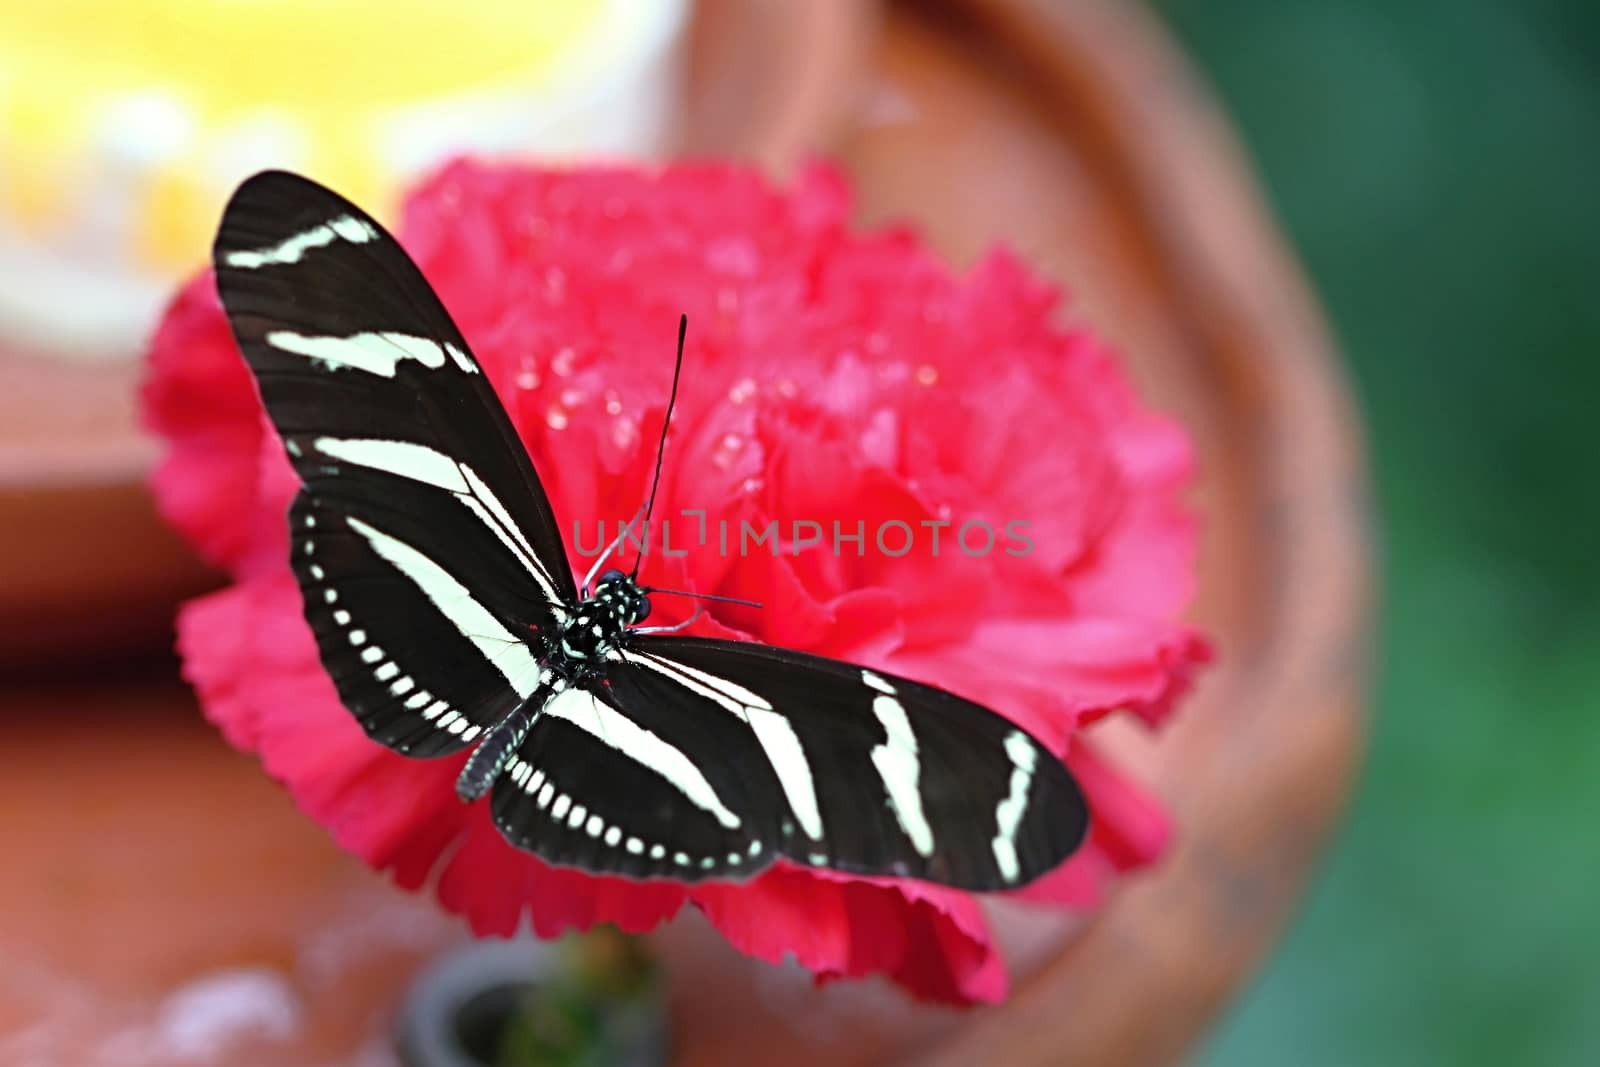 Photo shows details of colourful butterfly in the park.